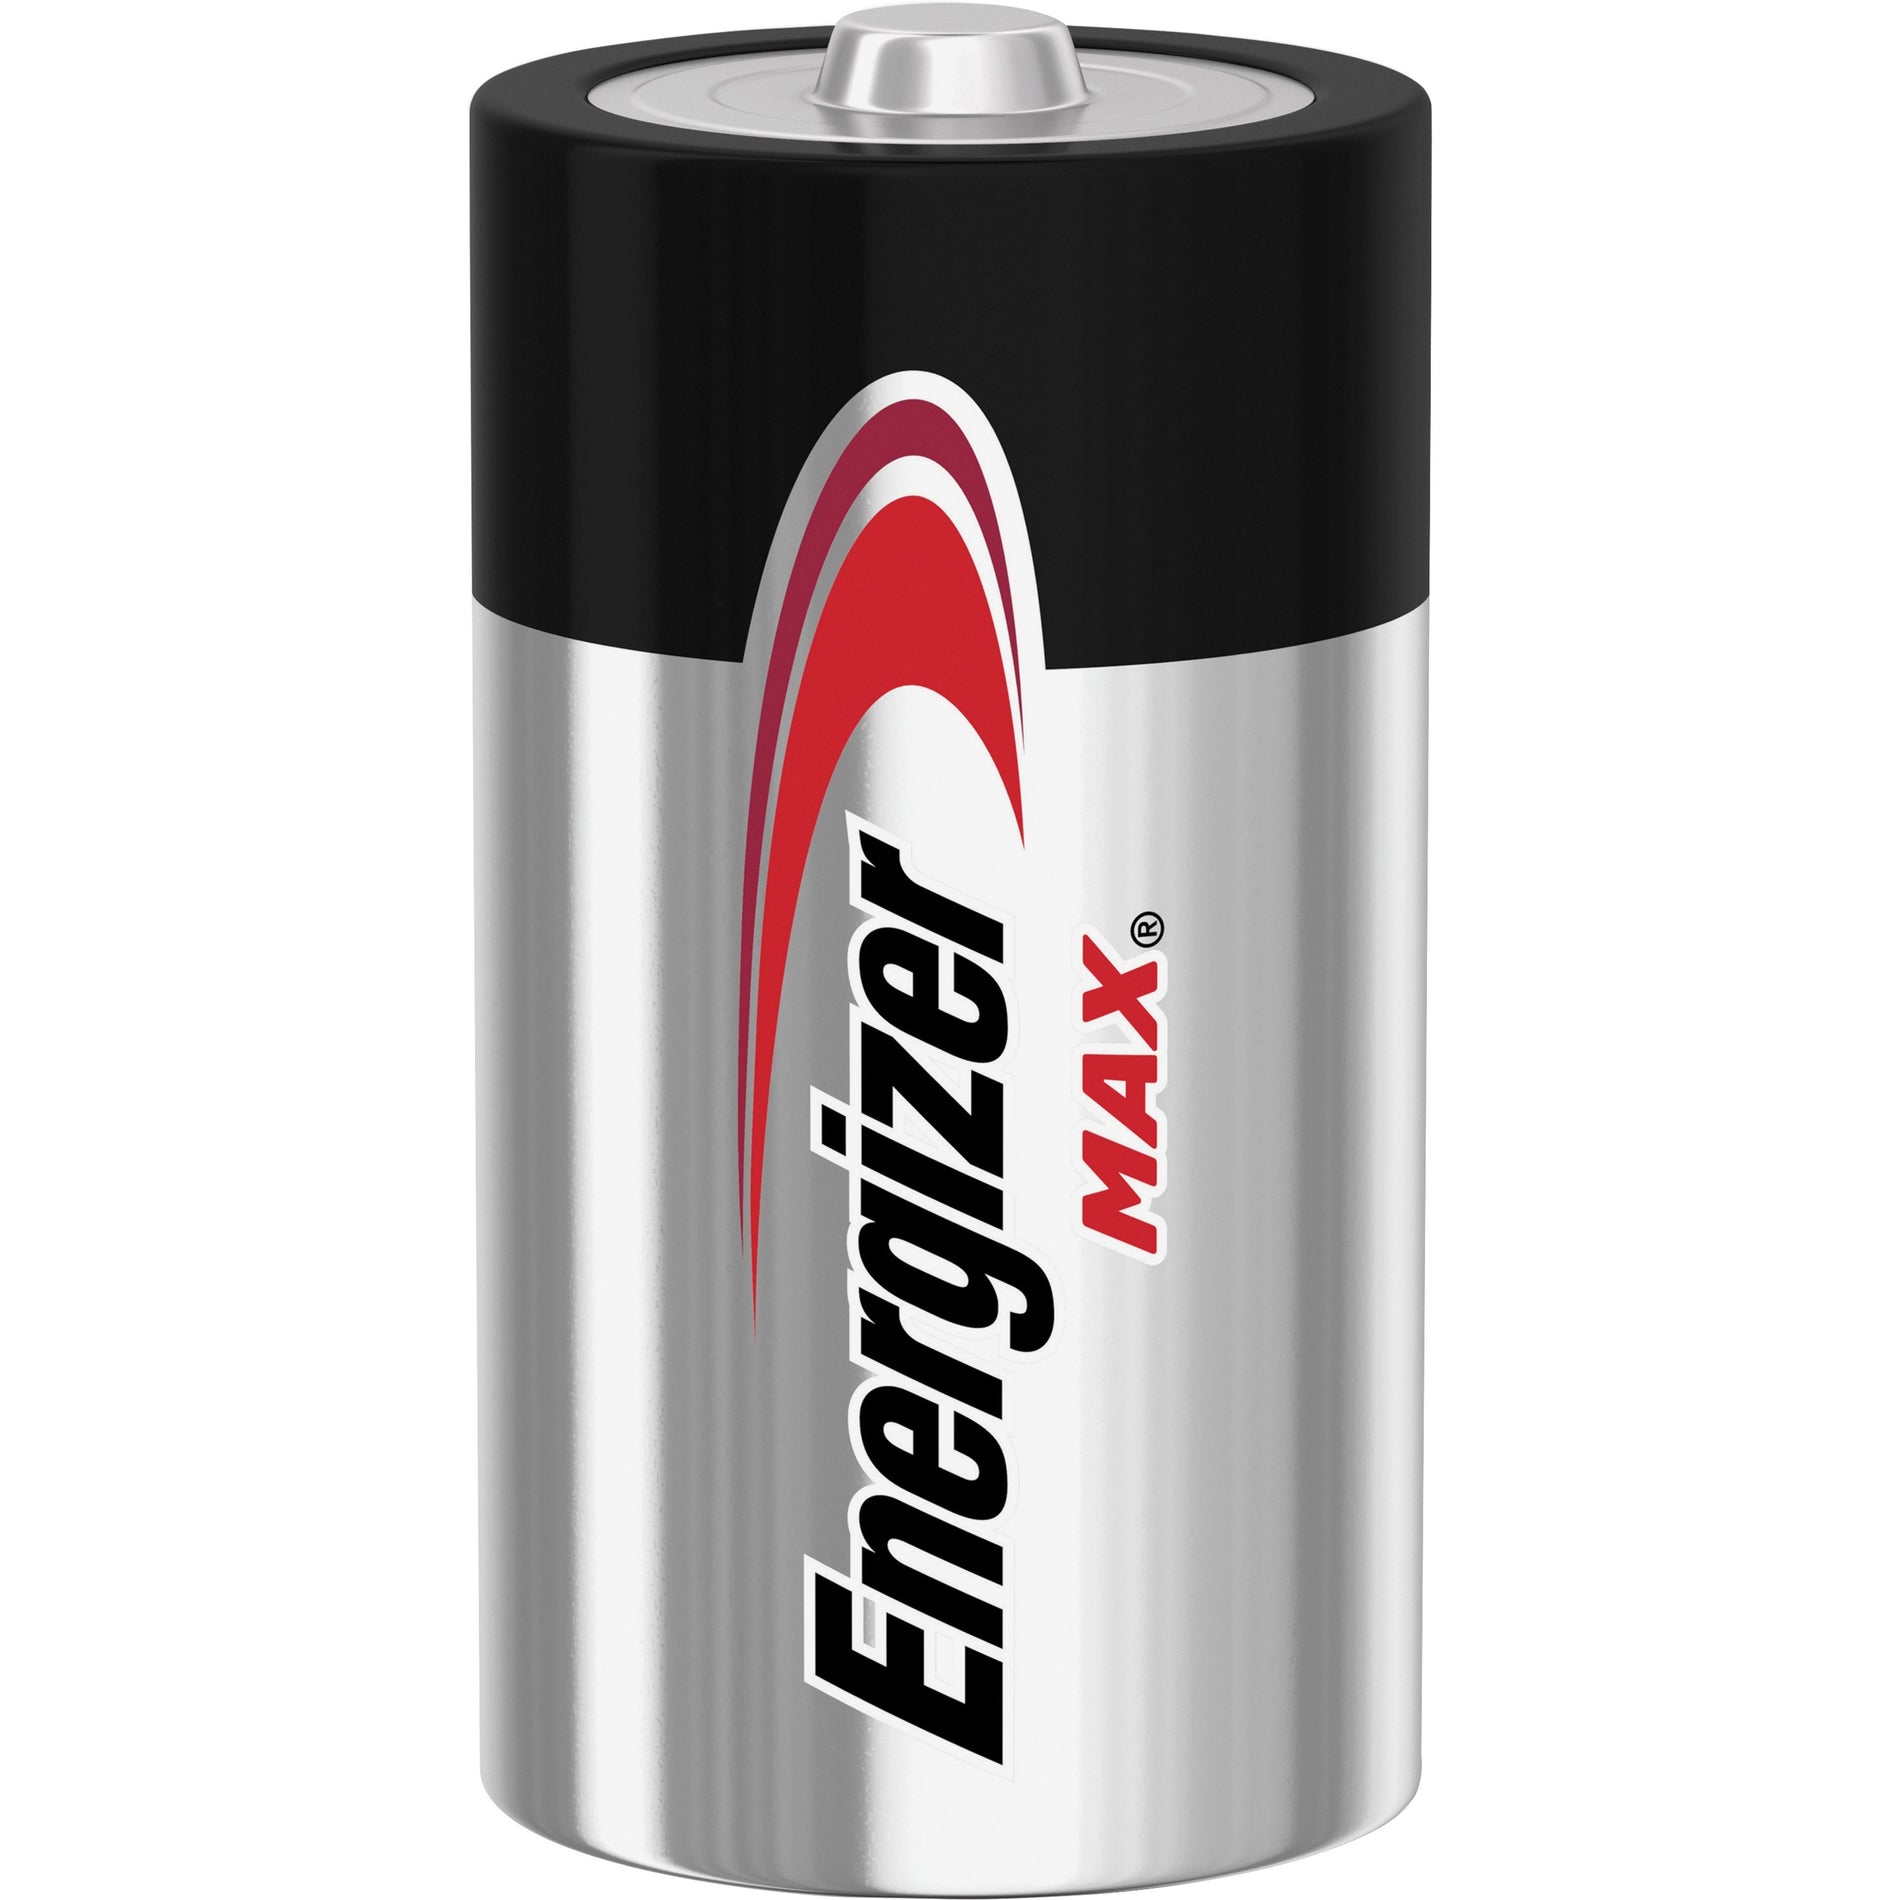 Energizer E93BP-2 MAX Alkaline C Batteries, Ideal for Toys, Flashlights, and Radios